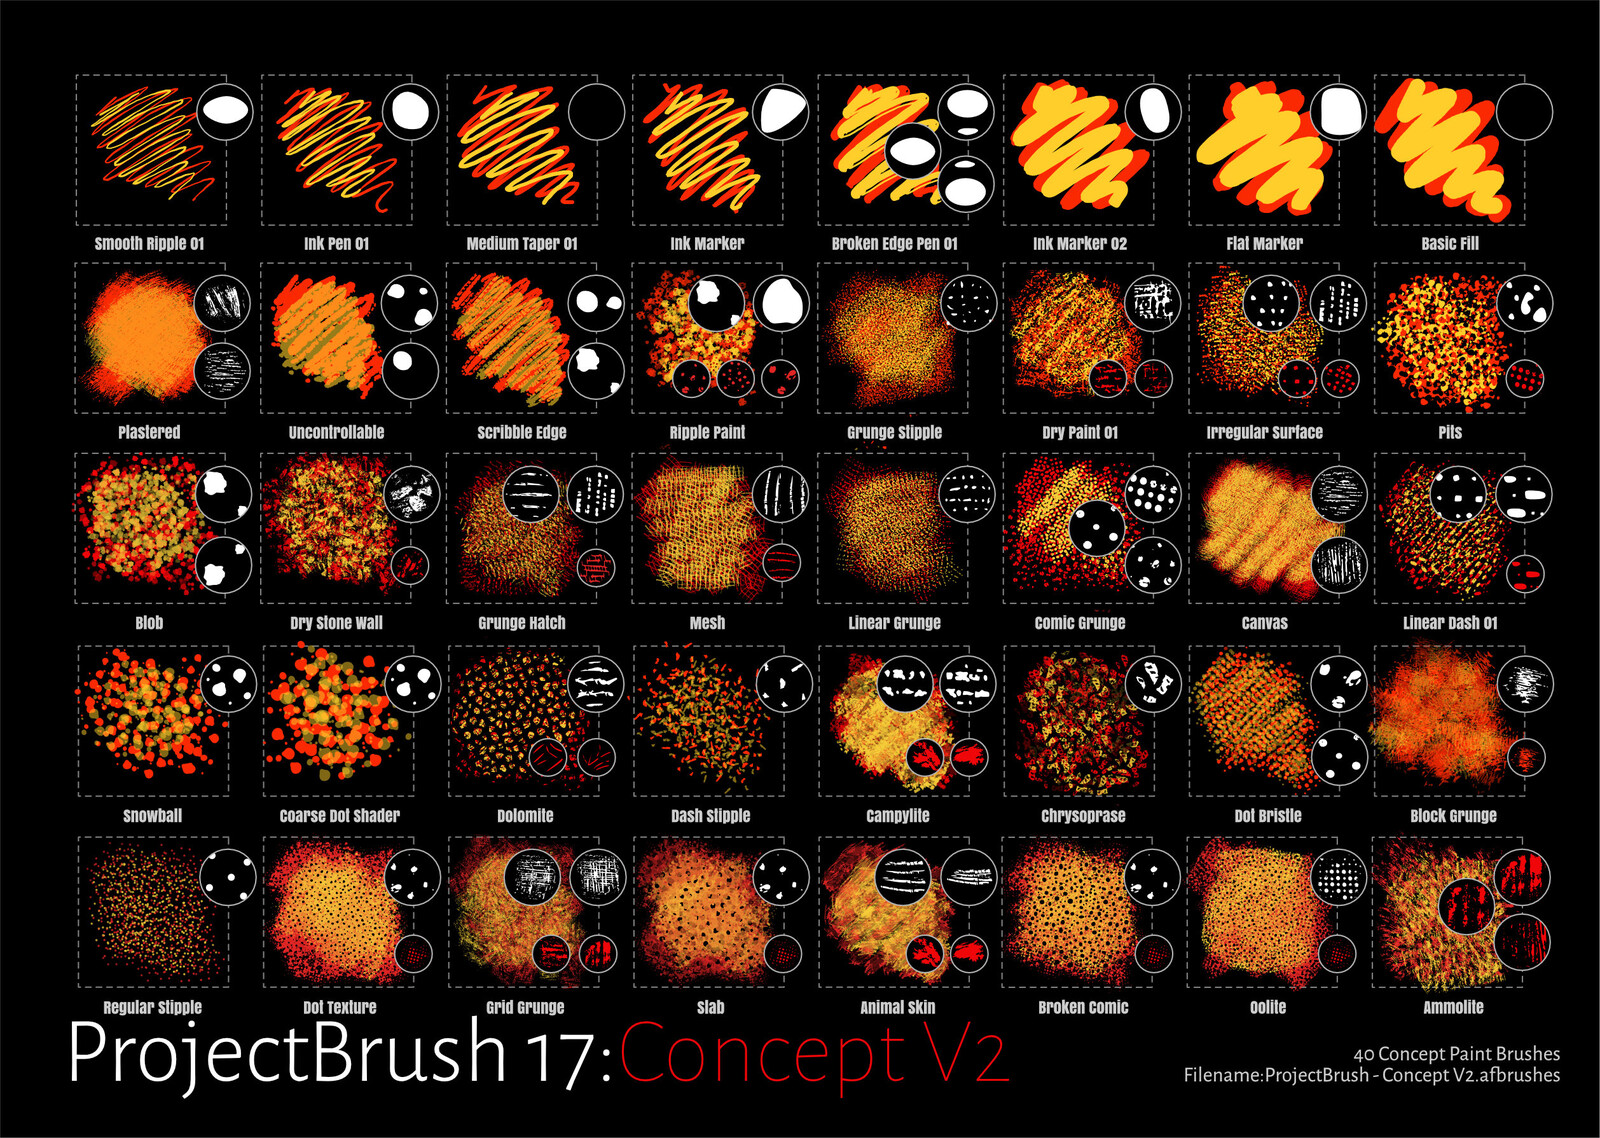 Project Brush: Concept 
Version 02